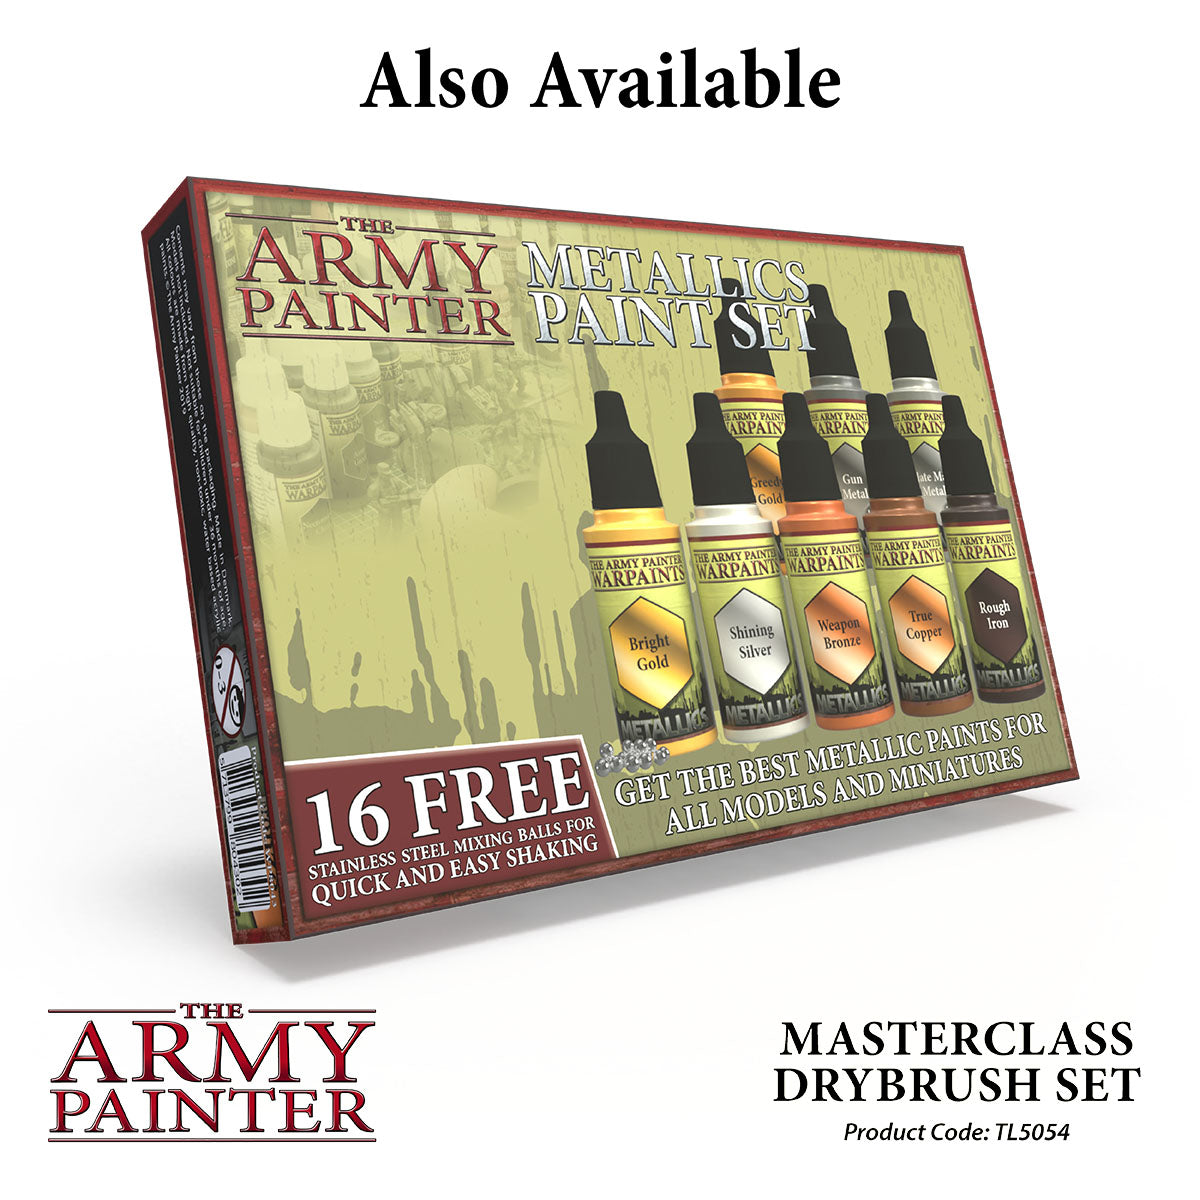 Masterclass Drybrush Set - 3 special-designed brushes - The Army